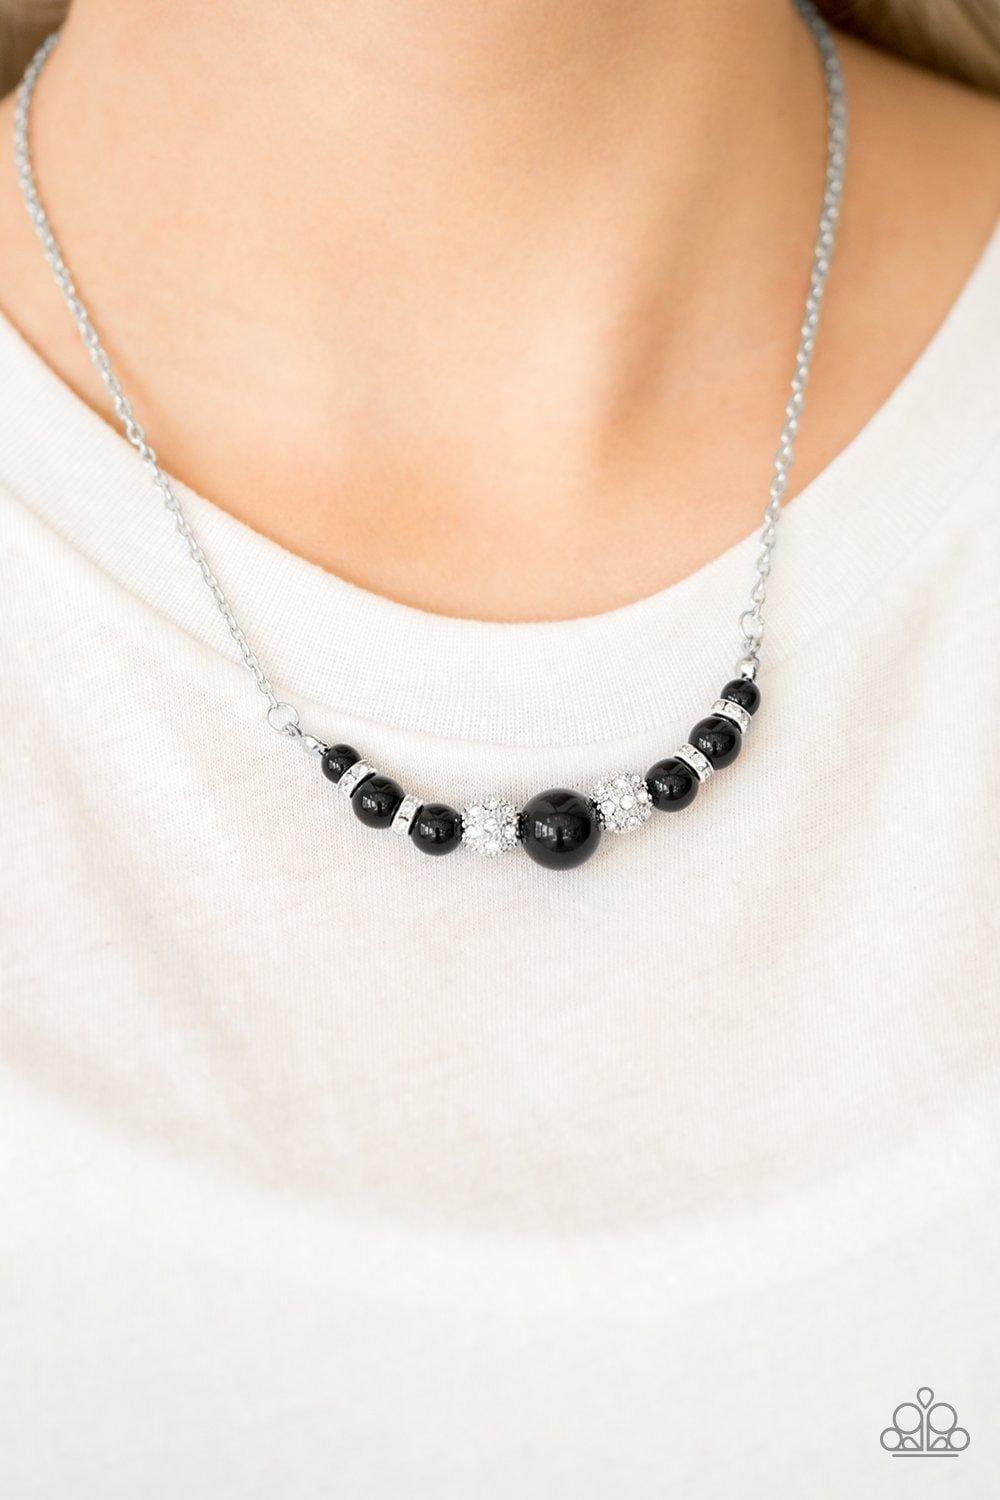 Paparazzi Accessories - Absolutely Brilliant - Black Necklace - Bling by JessieK